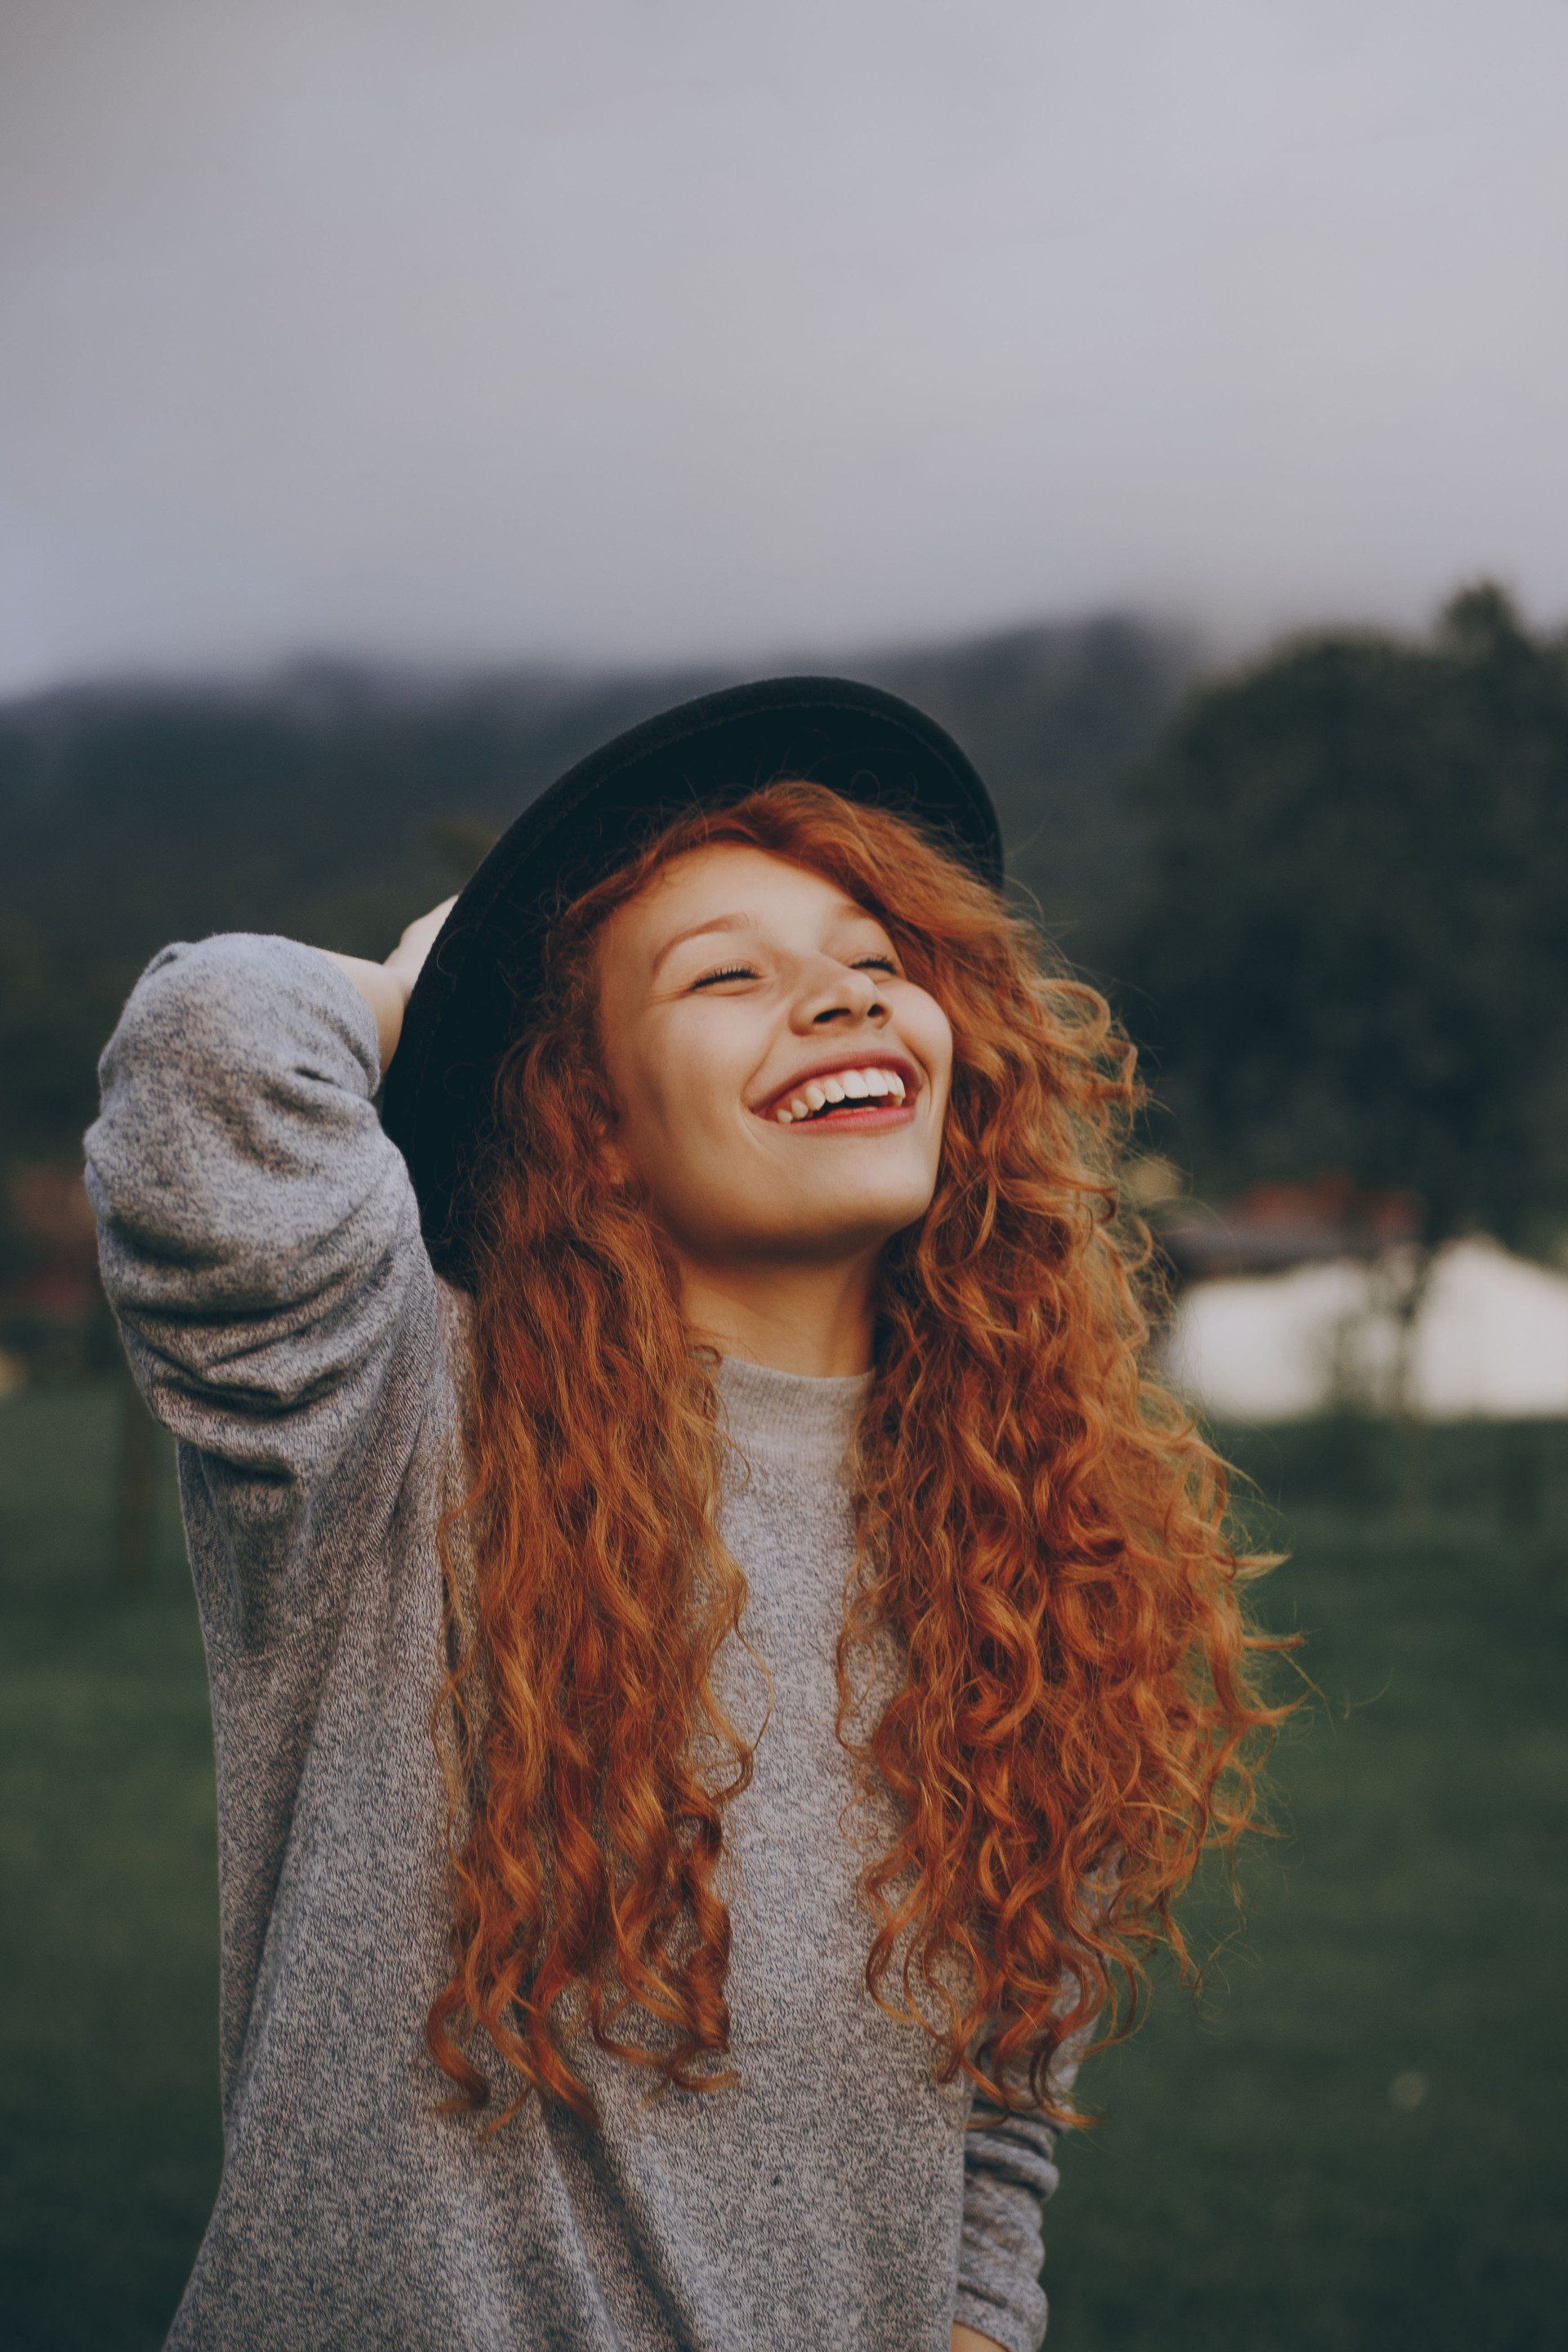 red headed woman with a hat on, looking up at the sky and smiling, with her eyes closed